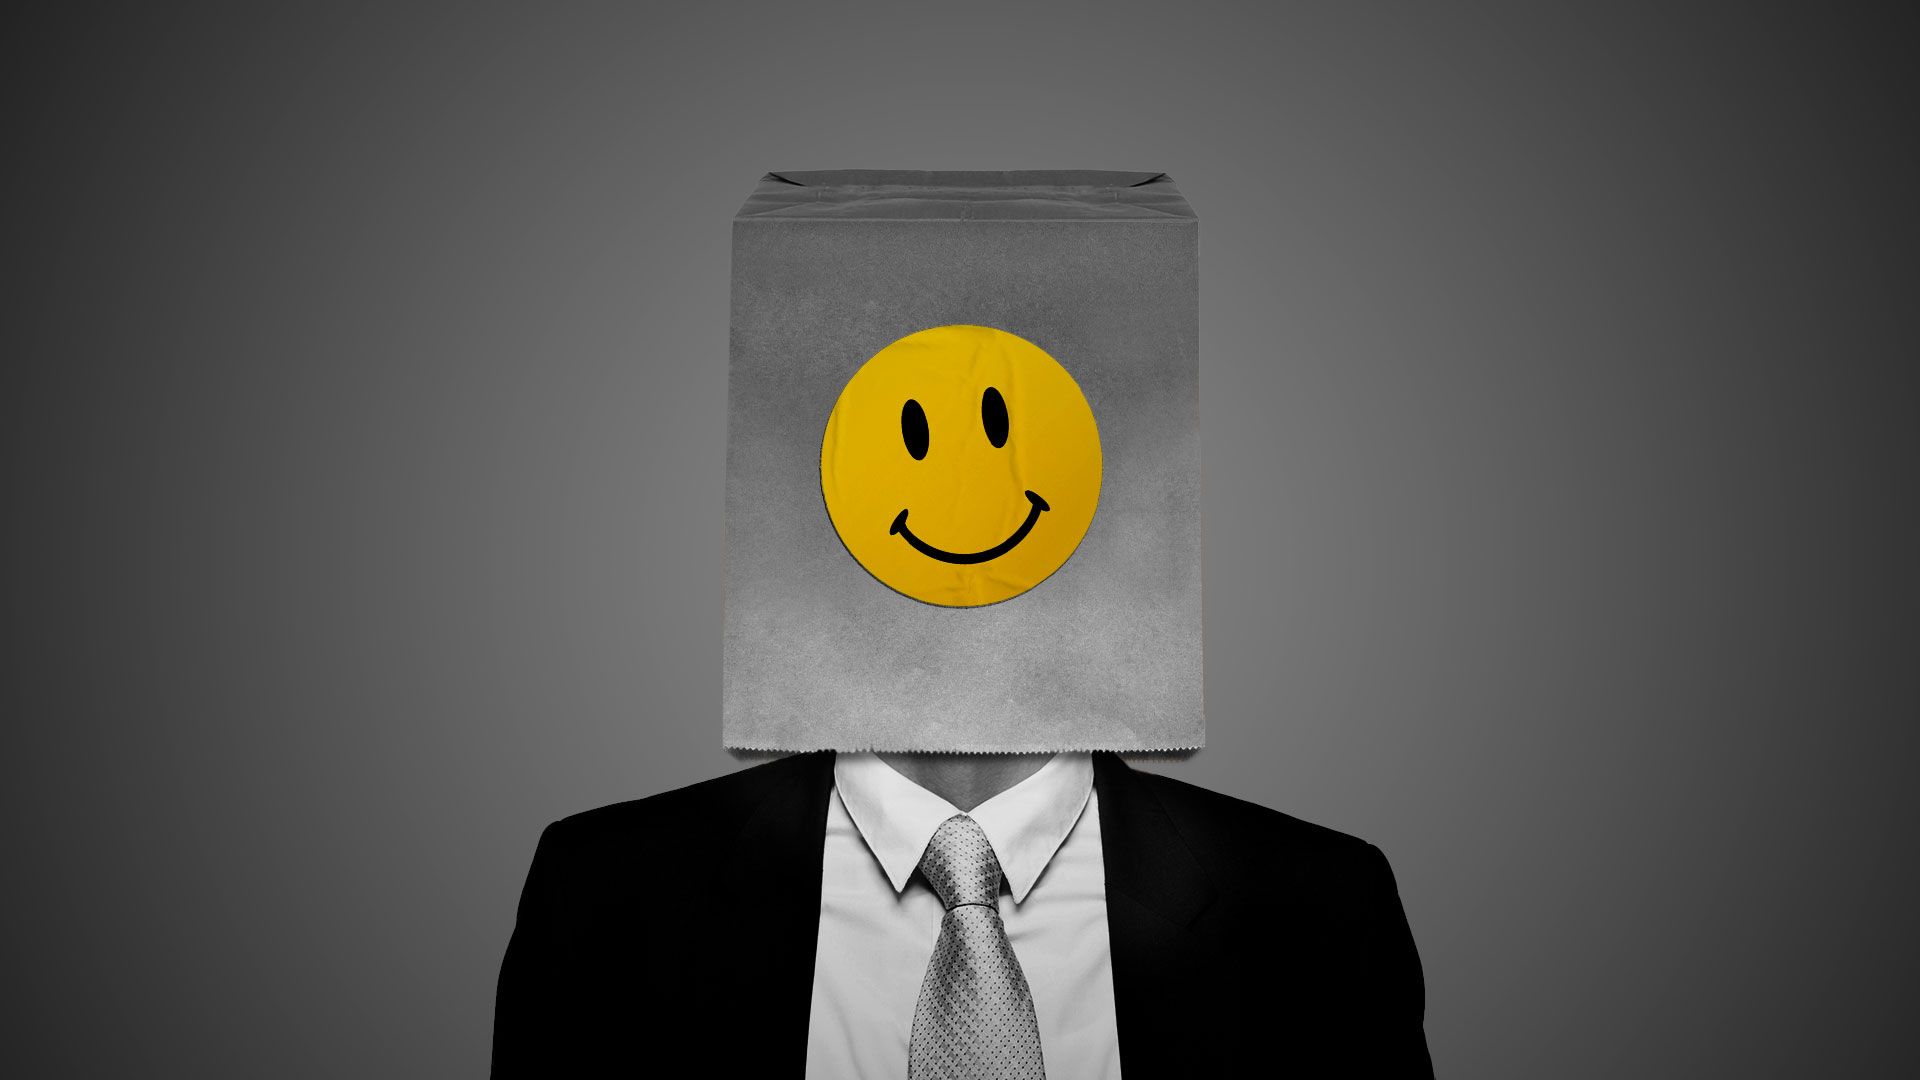 Illustration of a paper bag with a smiley face sticker over the head of a man in a suit